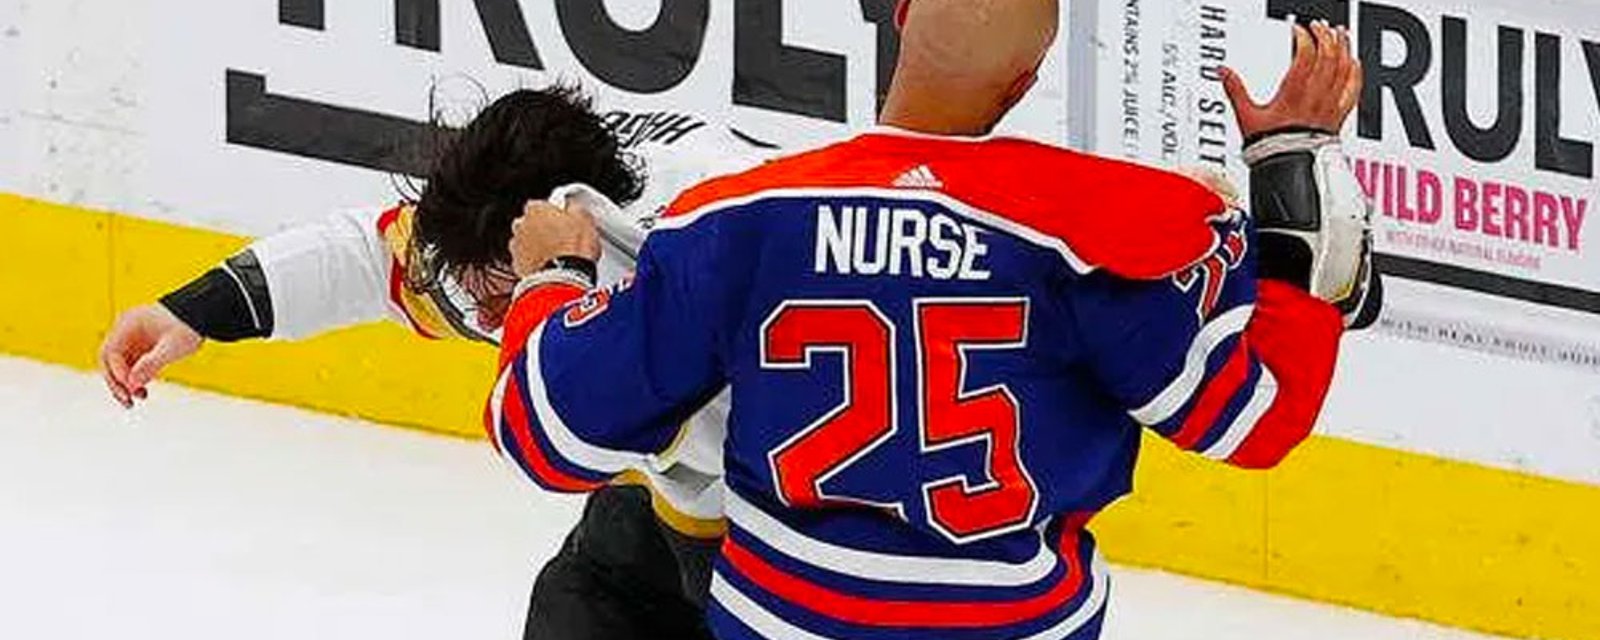 Nurse suspended by NHL Player Safety, Woodcroft fined $10,000